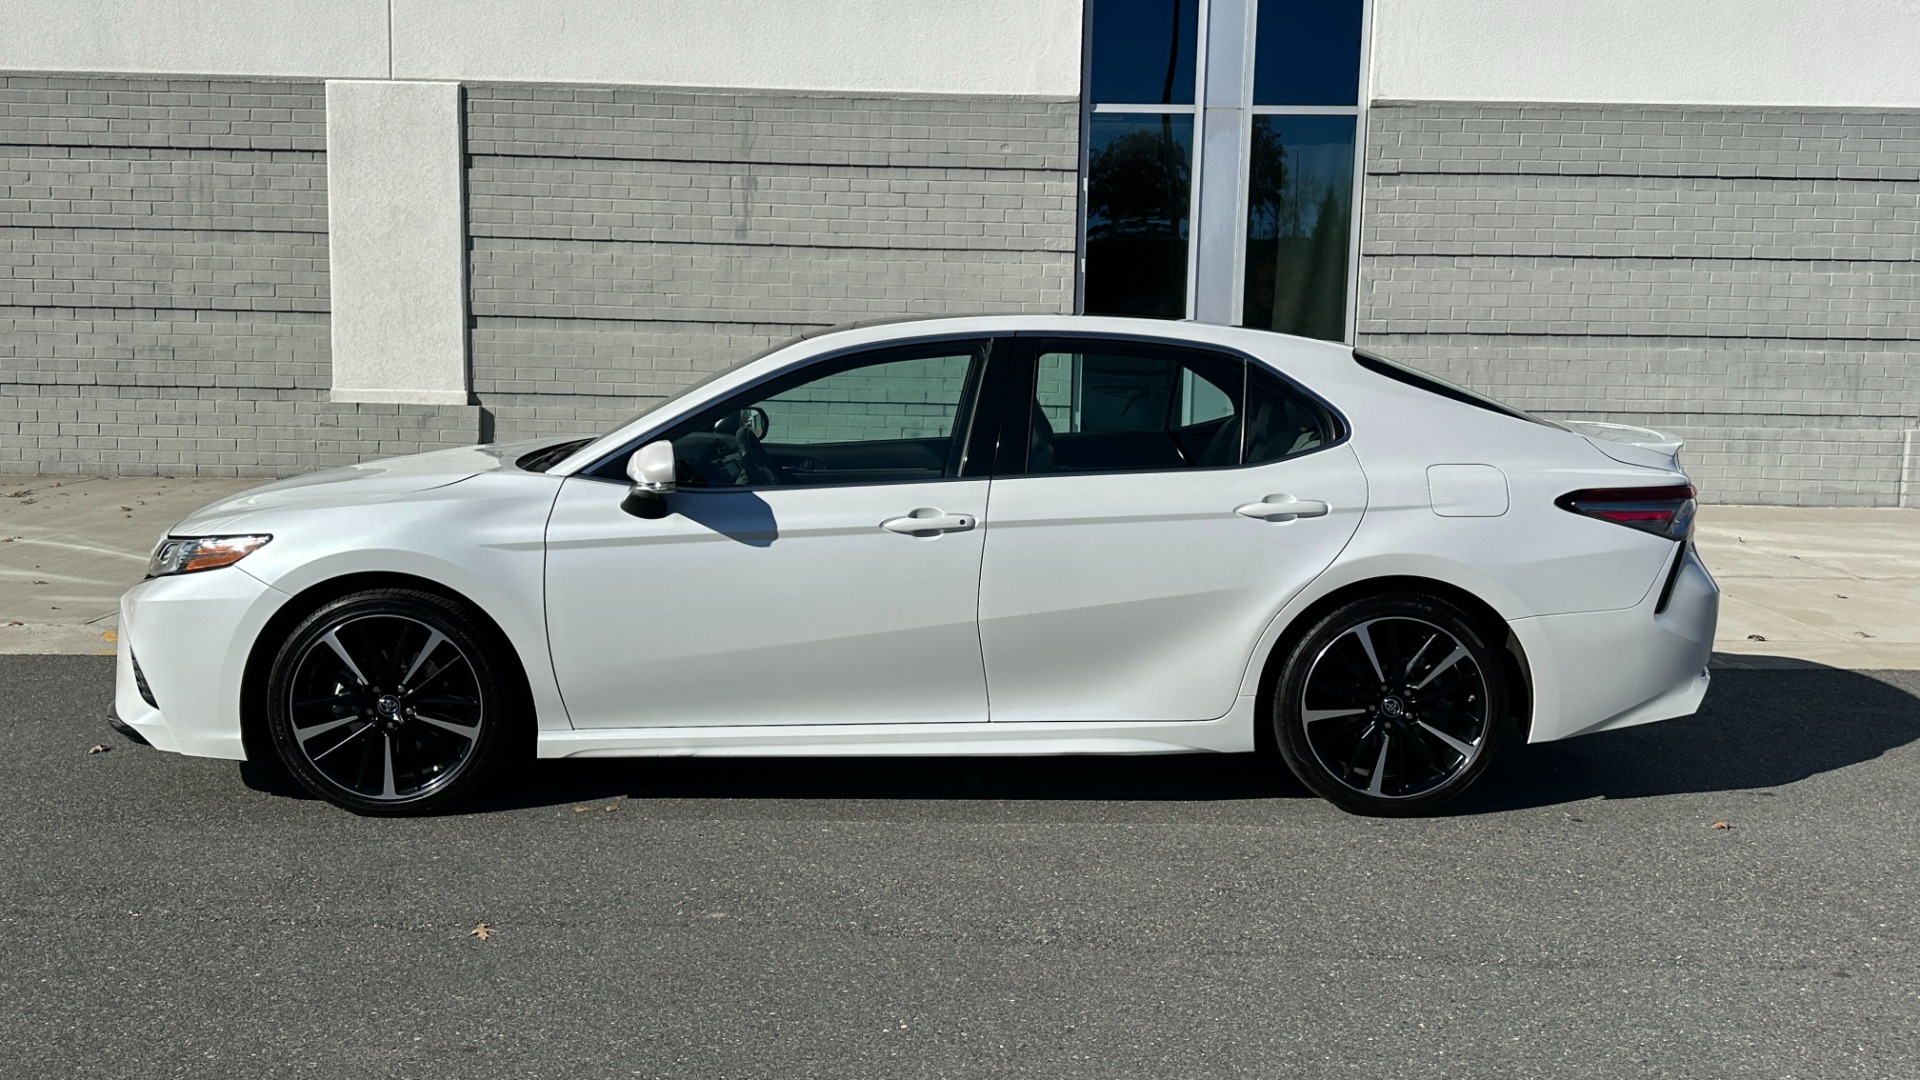 Used 2018 Toyota CAMRY XSE 2.5L SEDAN / 8-SPD AUTO / PANO-ROOF / 19IN WHEELS for sale Sold at Formula Imports in Charlotte NC 28227 3